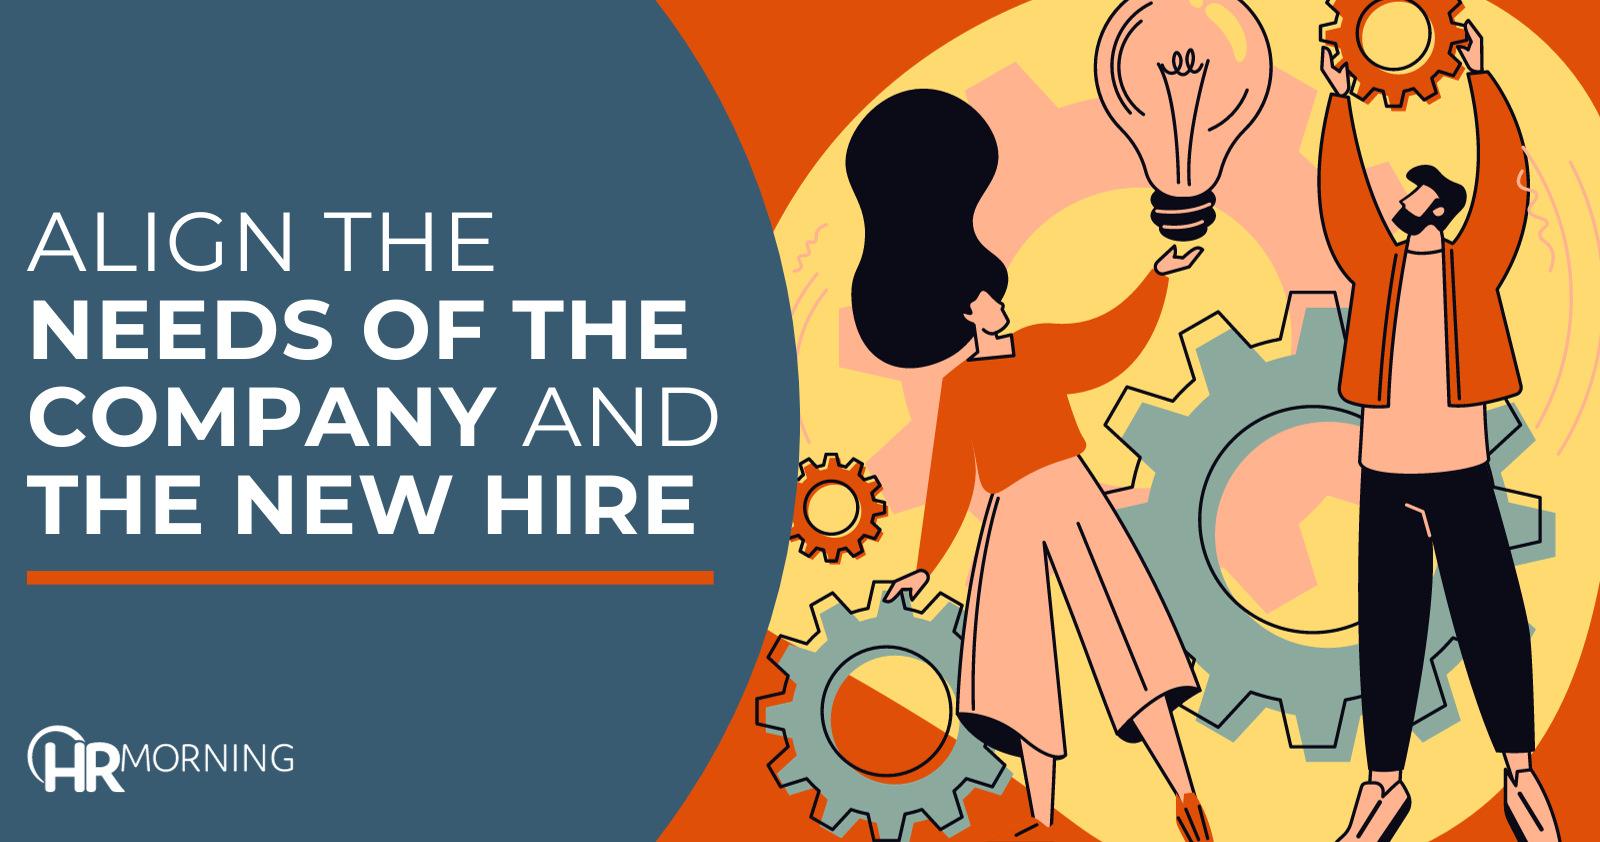 Align the needs of the company and the new hire